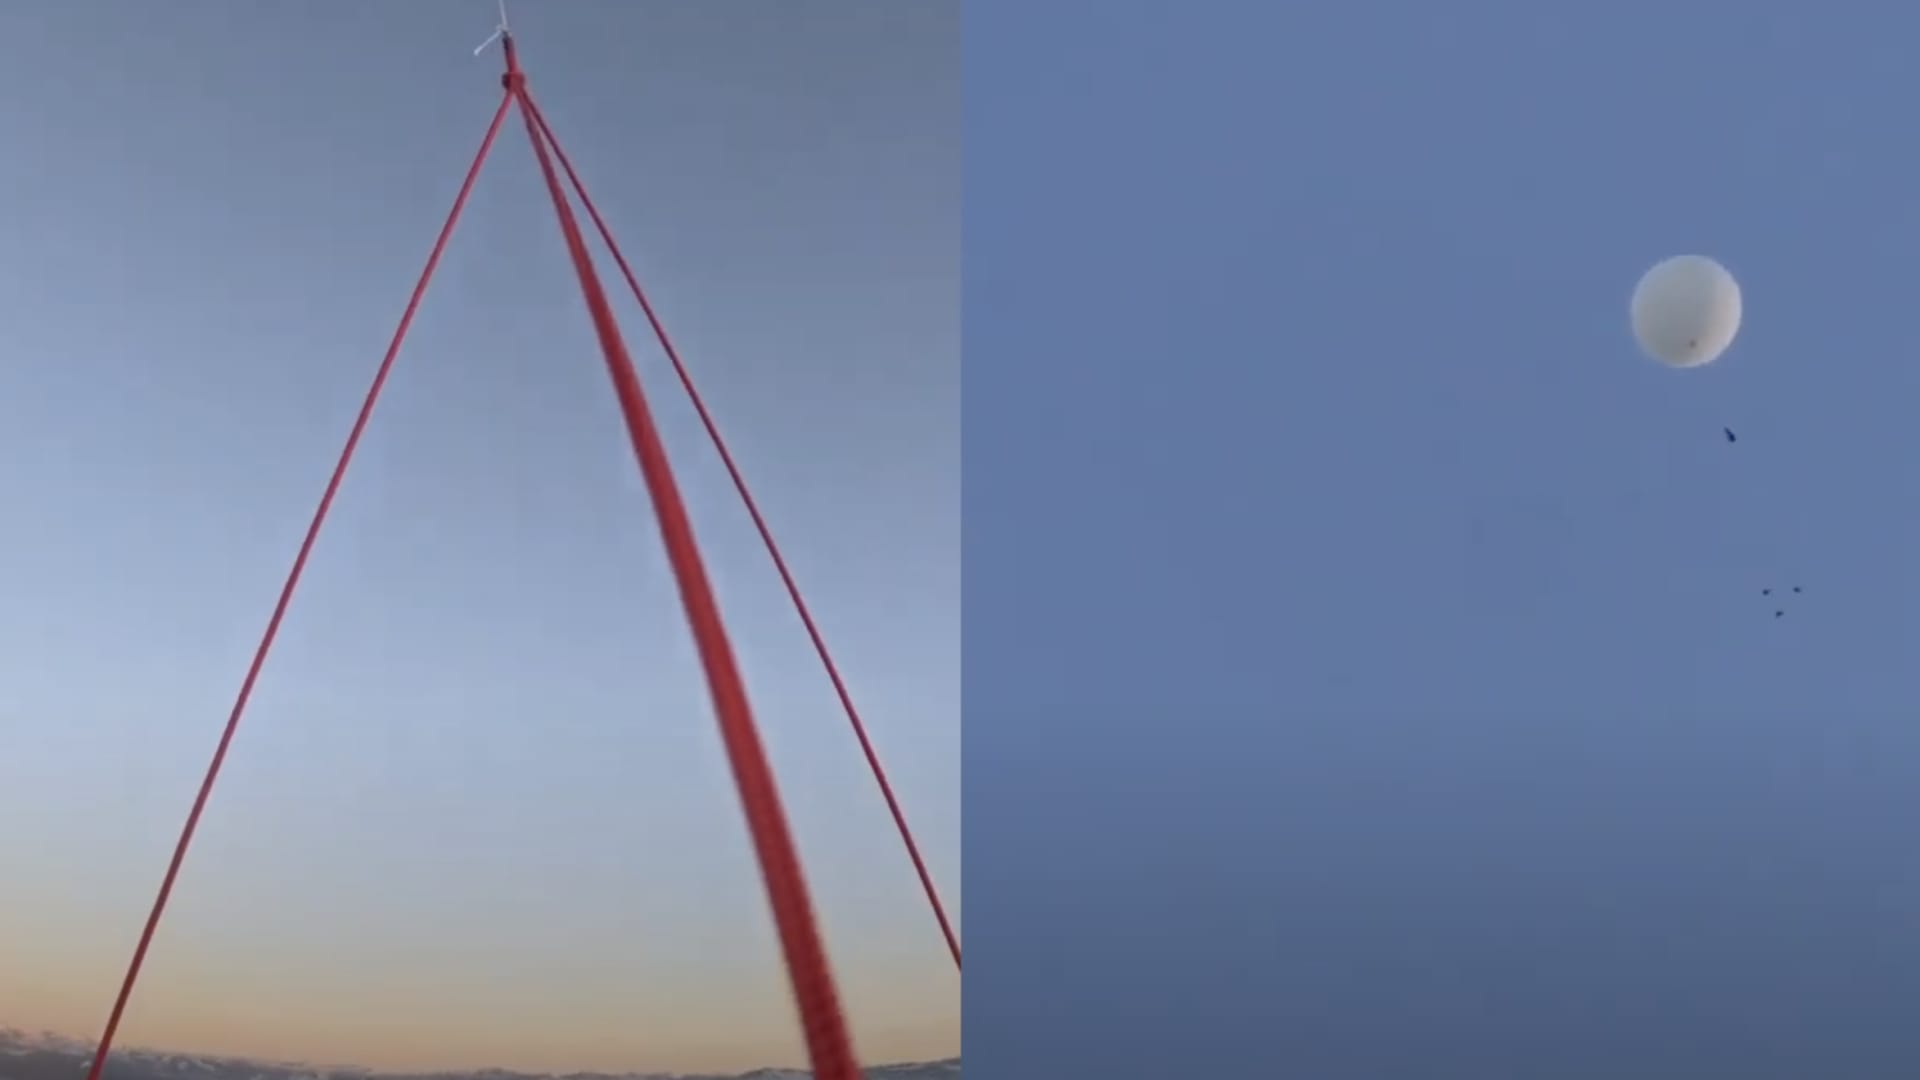 A view from the Make Sunsets balloon launched in Nevada.